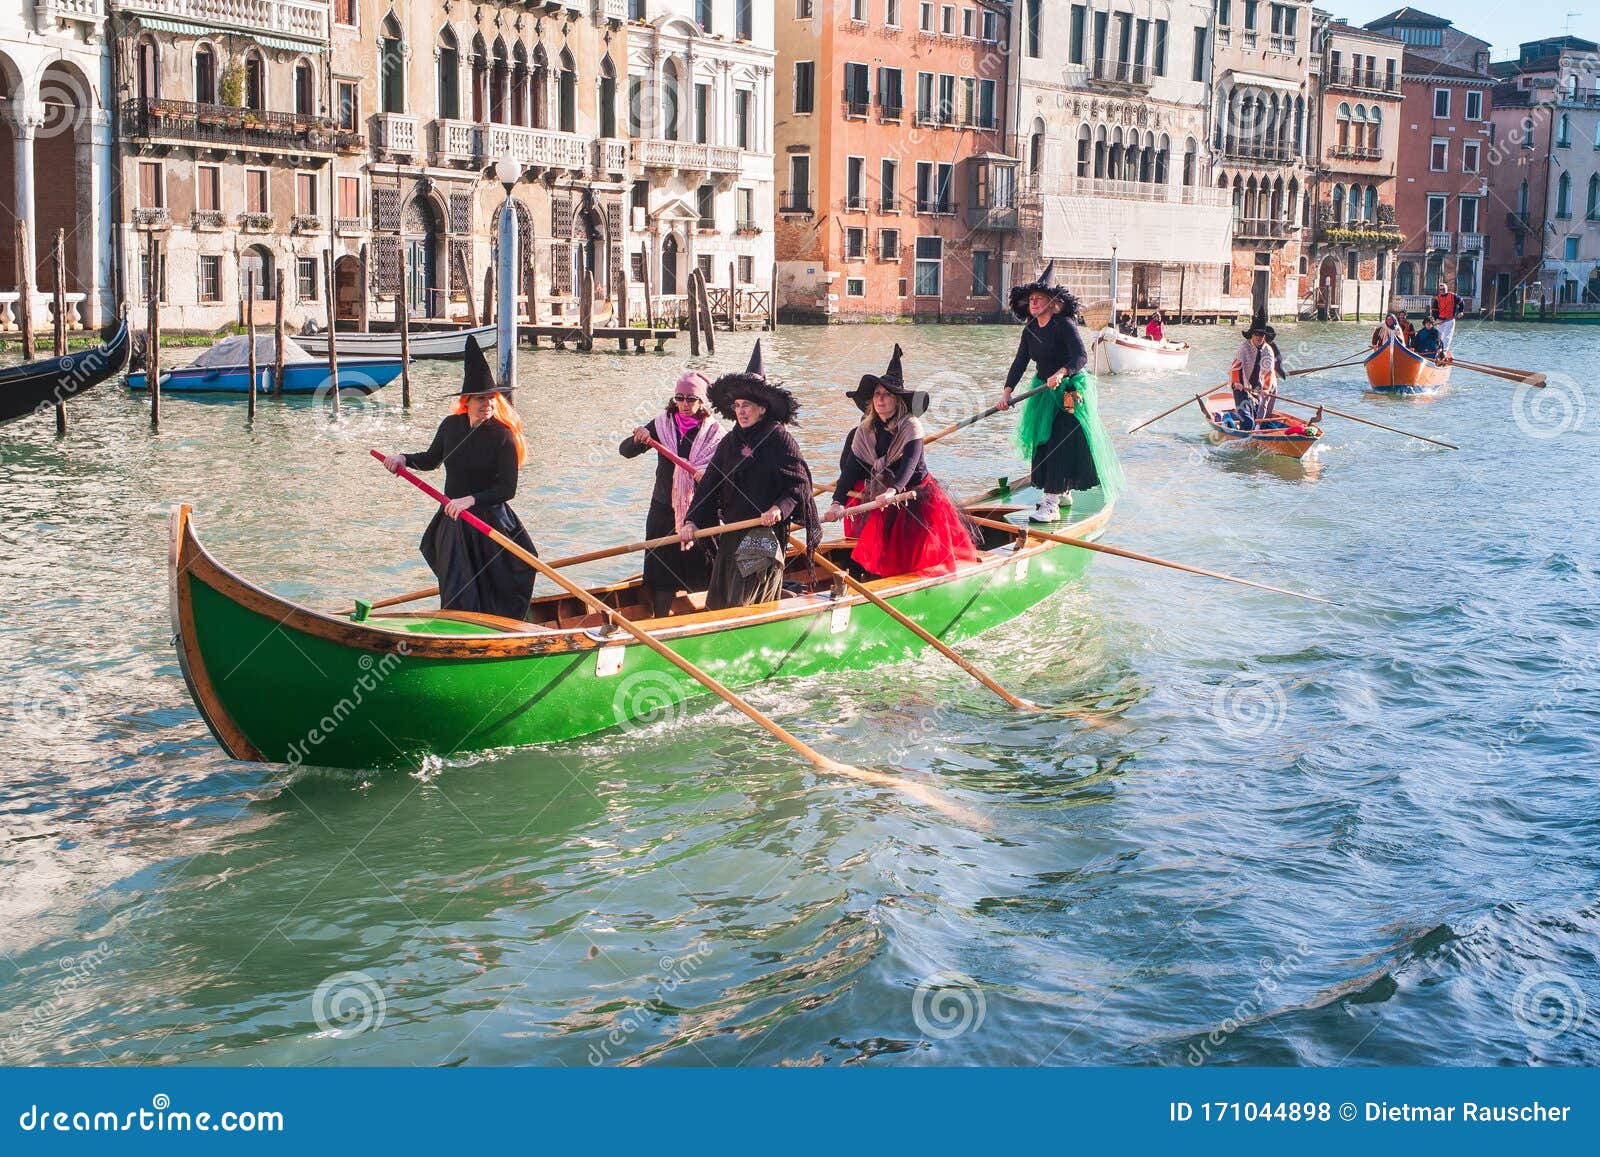 Befana italy hi-res stock photography and images - Alamy